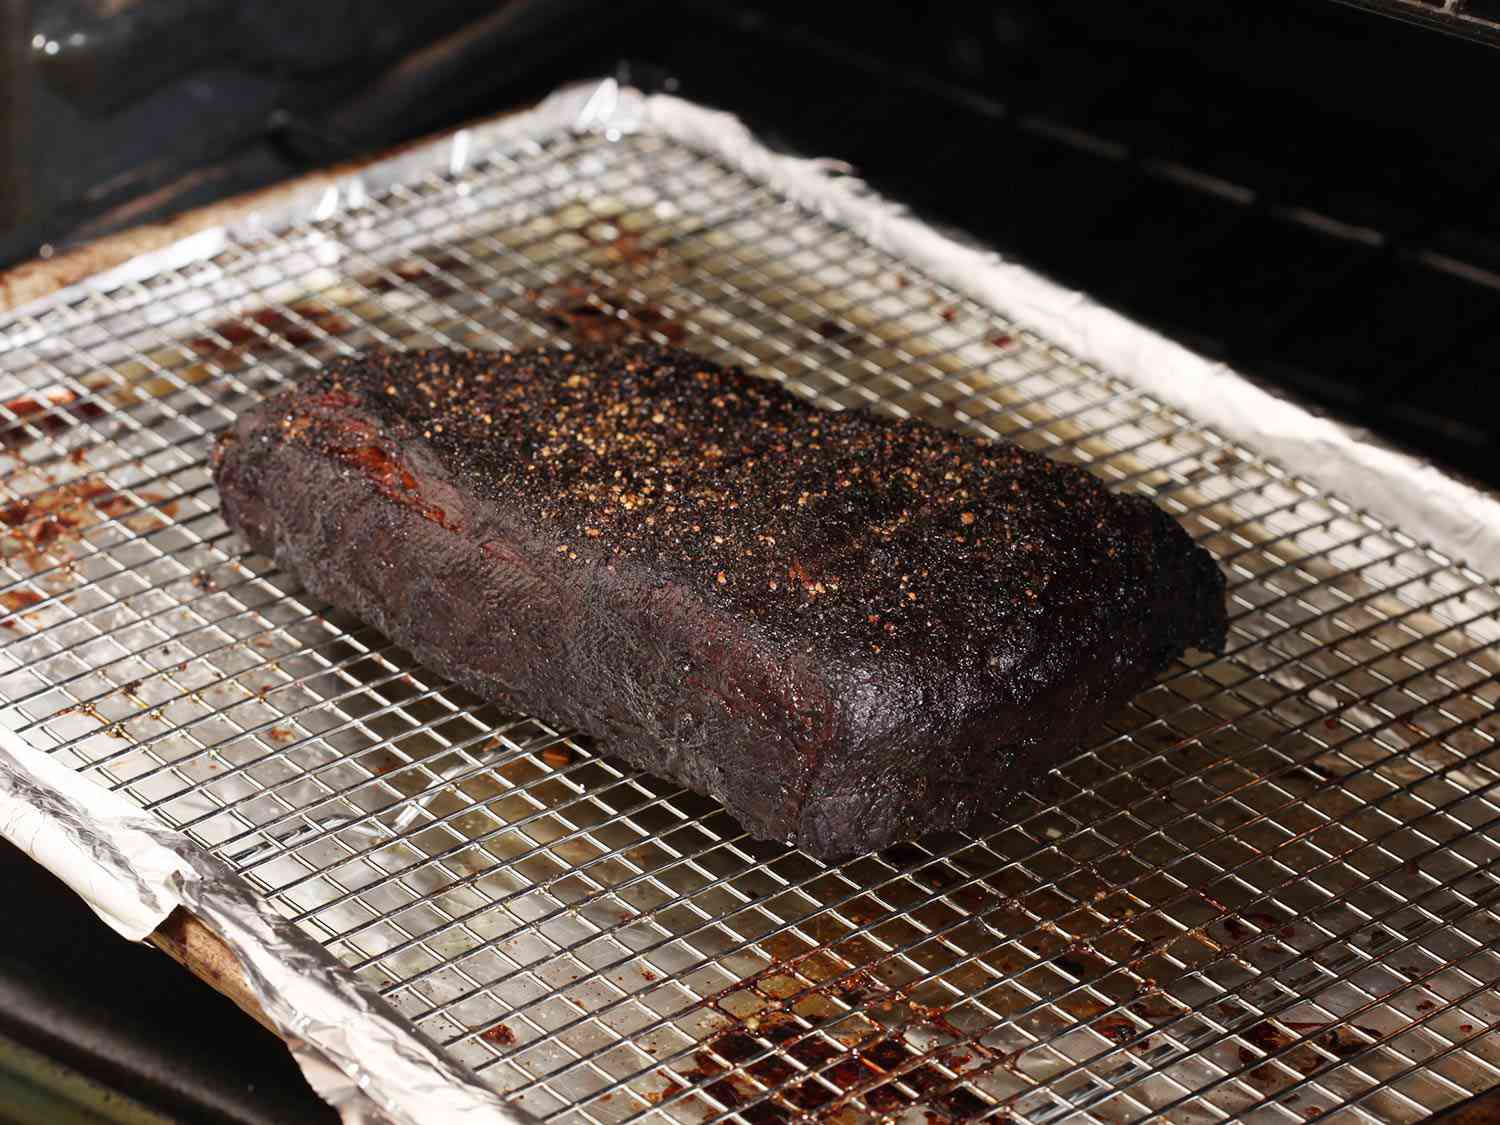 Hunk of brisket with dark crust resting on wire rack over a baking sheet.